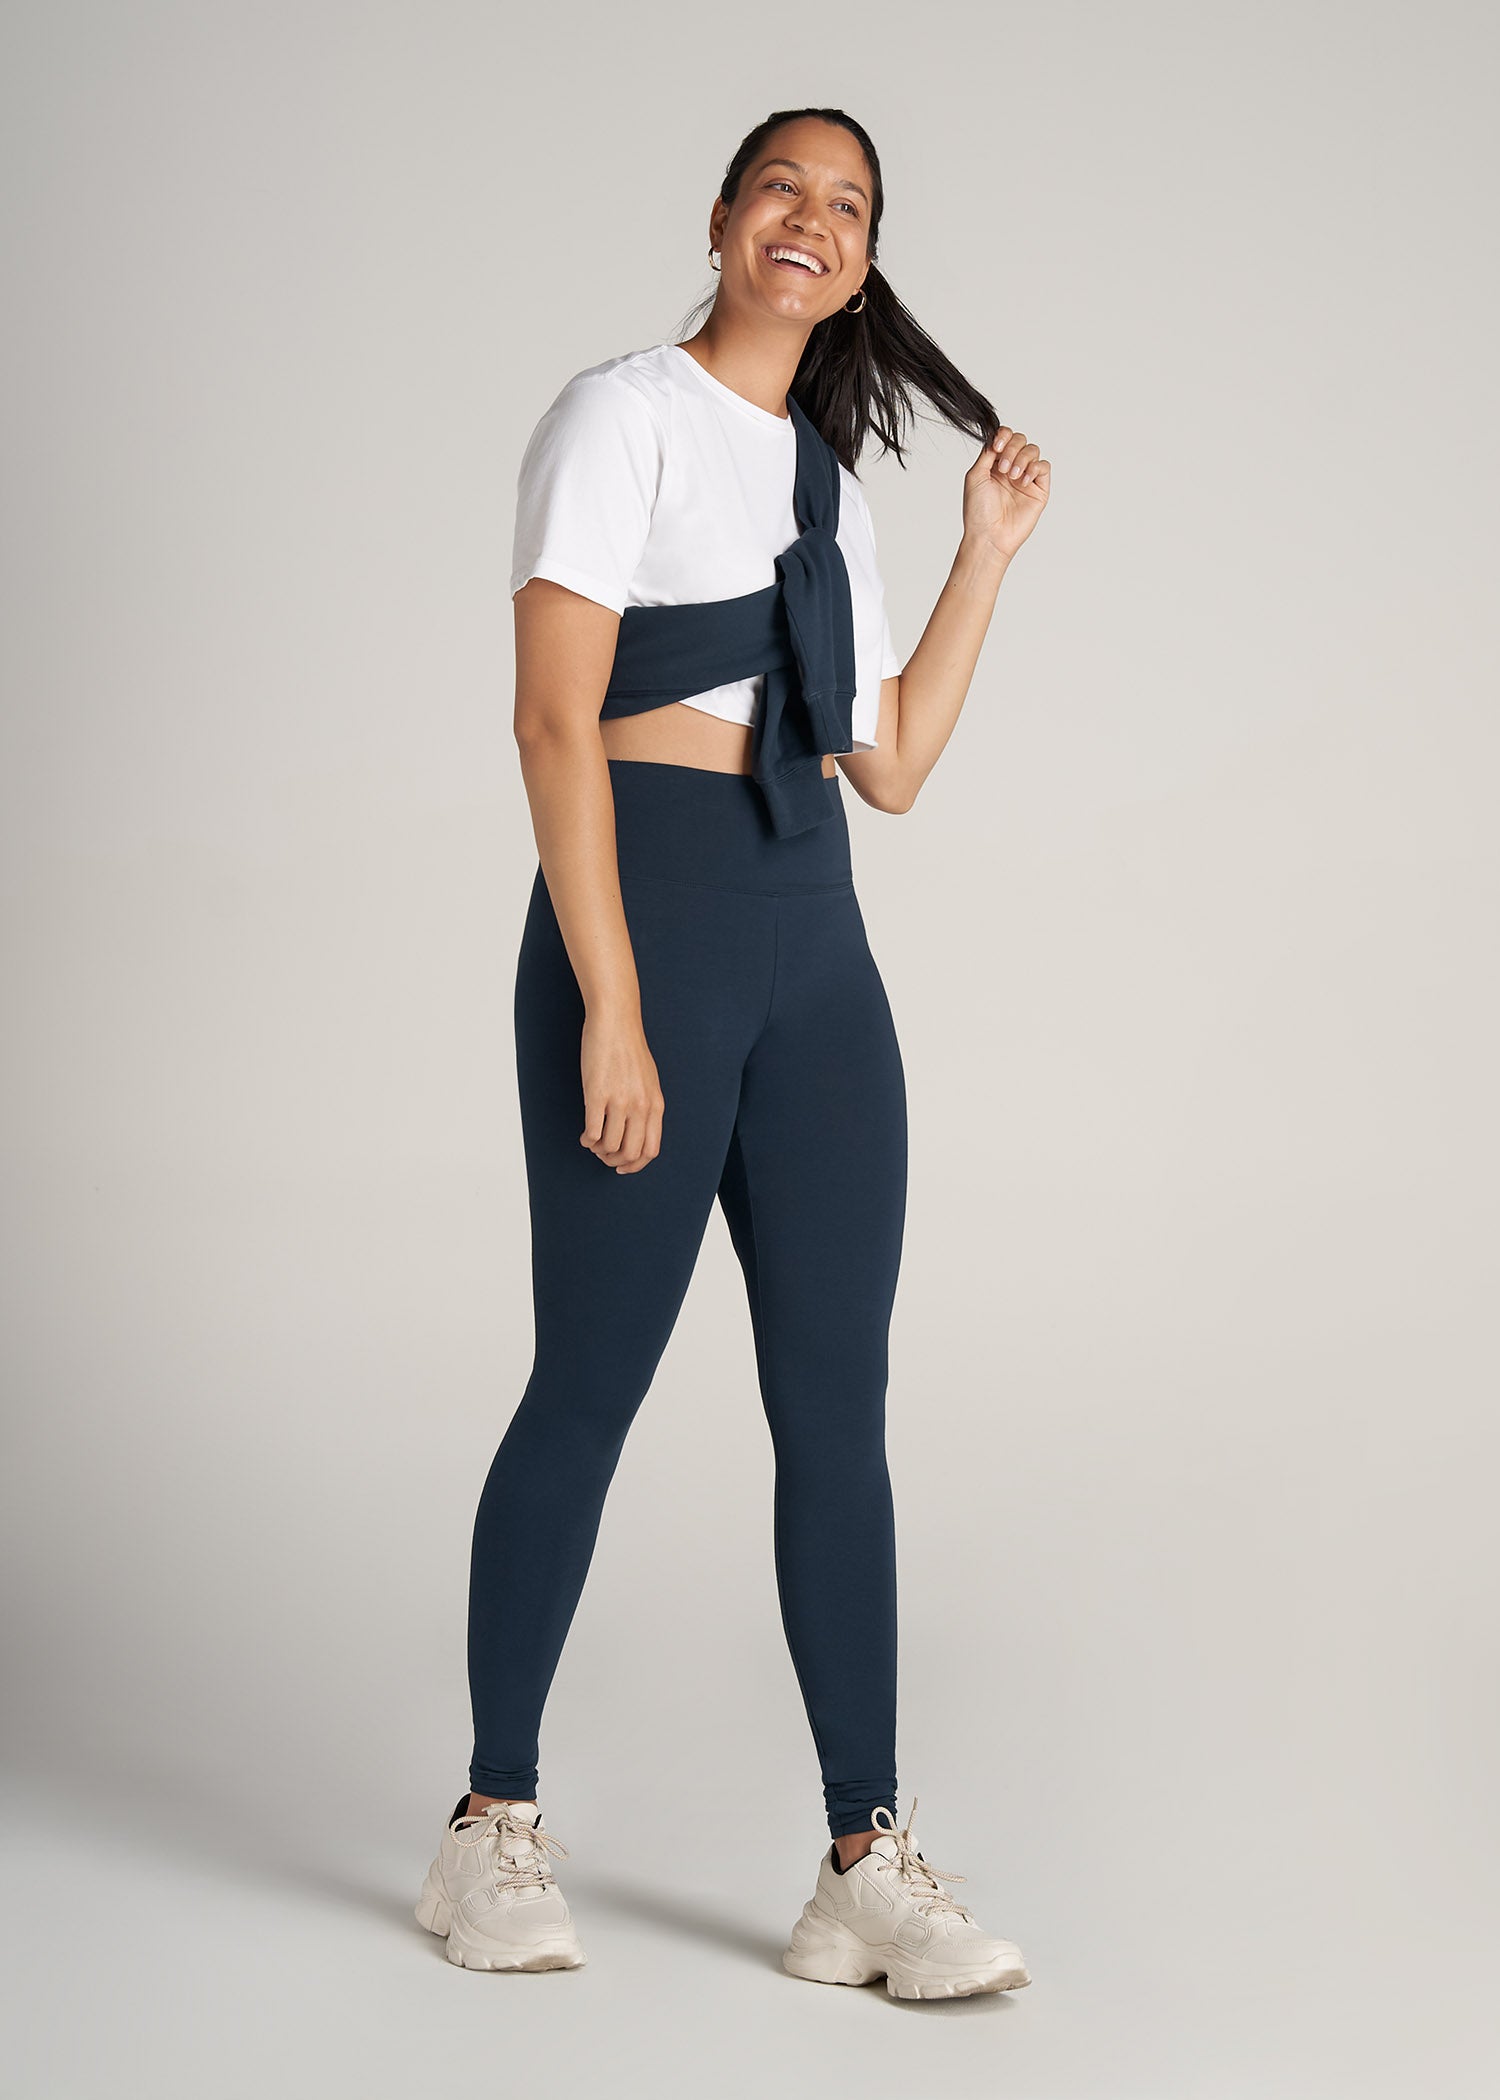 Women's Tall Seamless Compression Legging Bright Navy